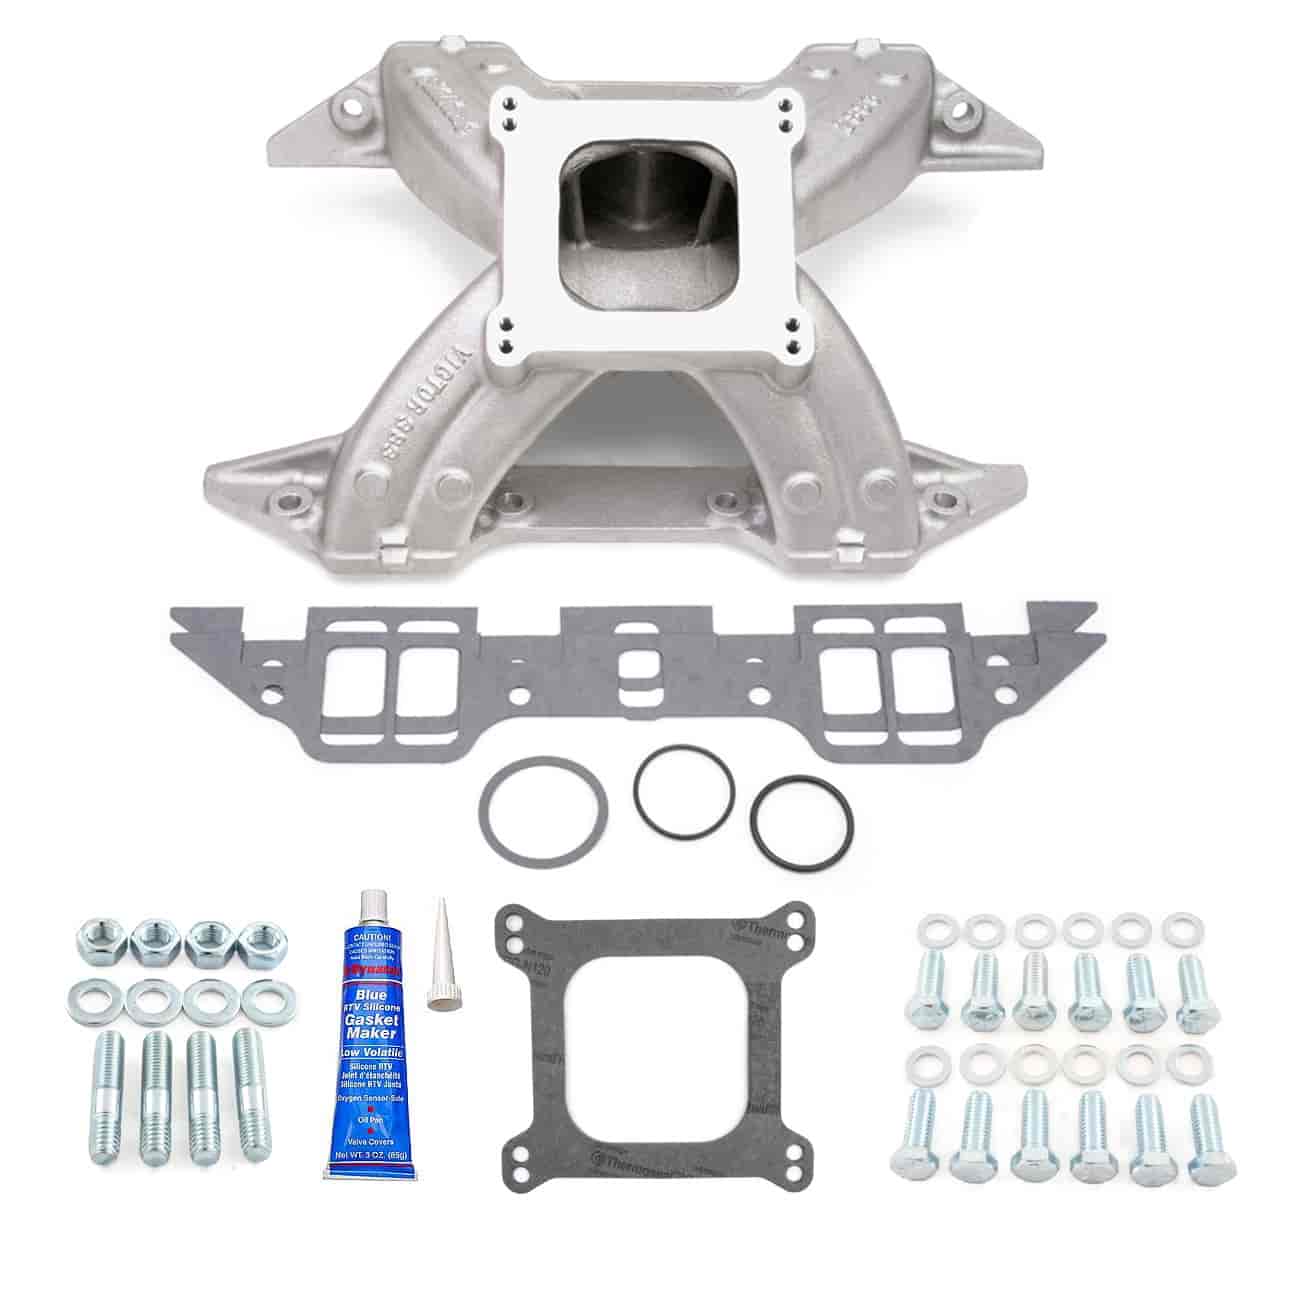 Victor 383 Intake Manifold Kit Includes: Victor 383